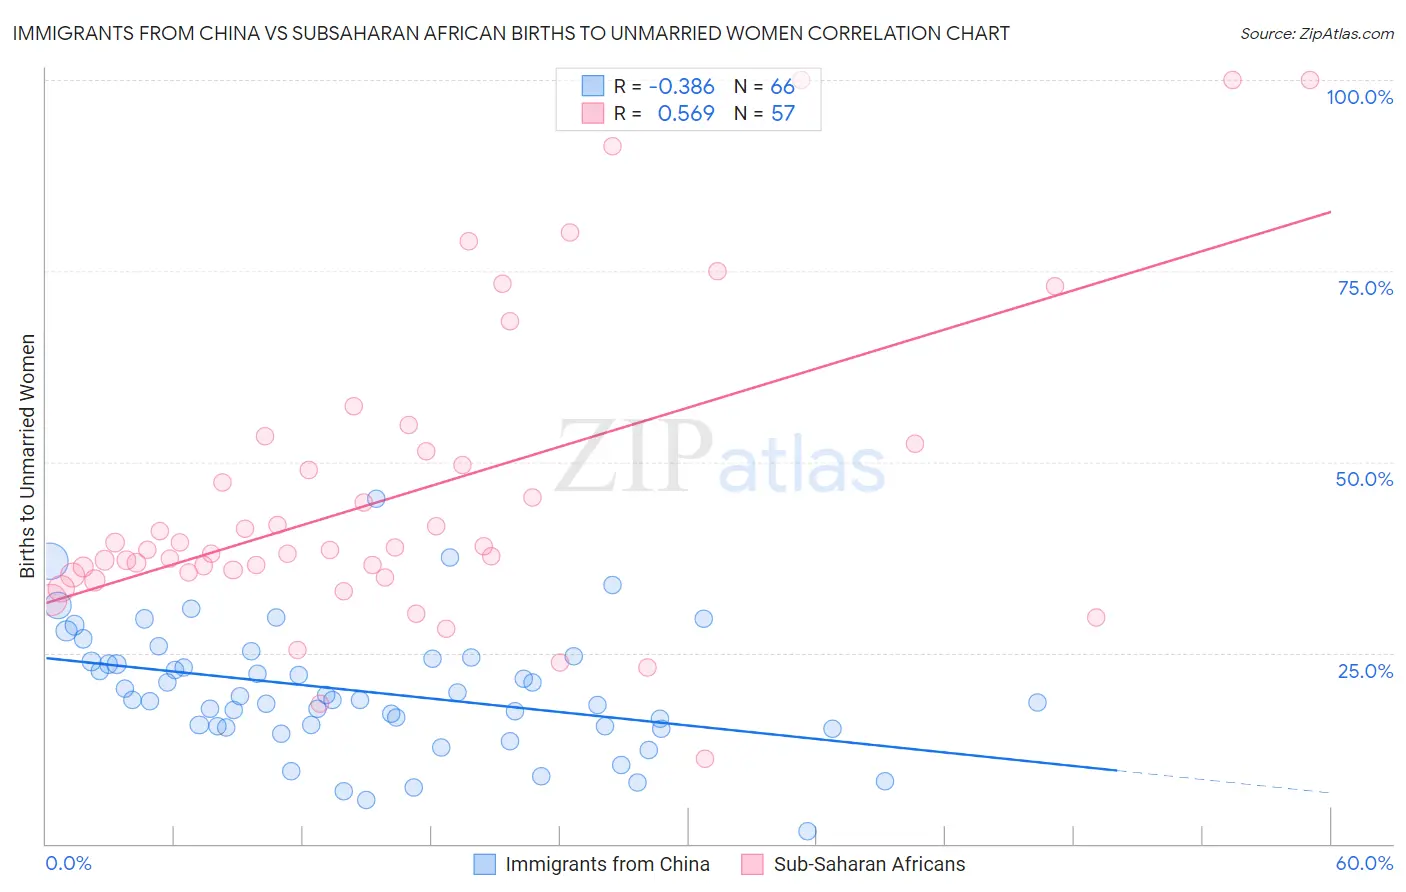 Immigrants from China vs Subsaharan African Births to Unmarried Women